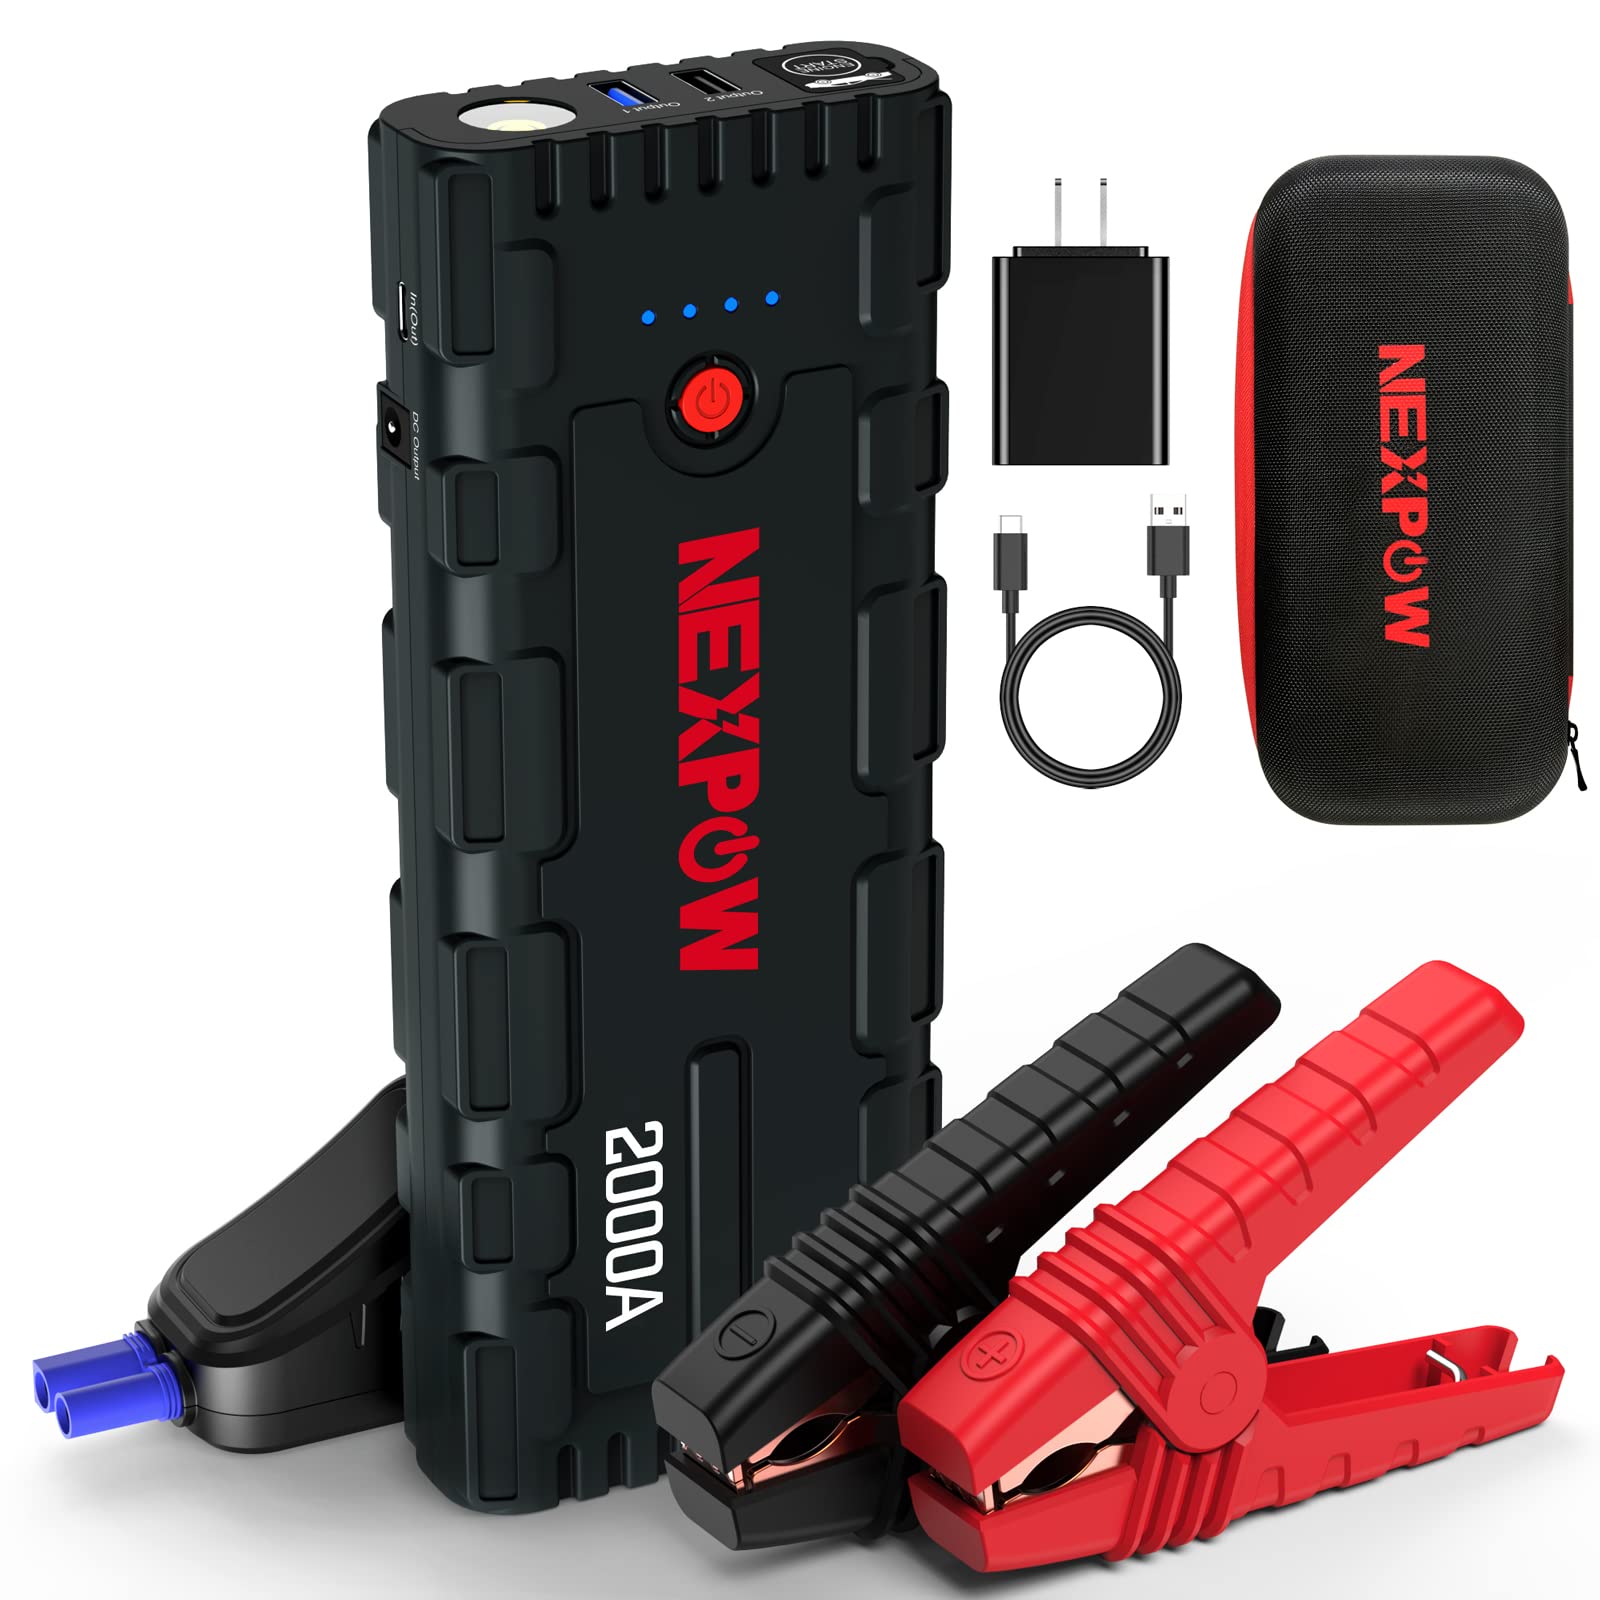 TIWKICH A11 Portable Automotive Jump Starter 2000A 12V Lithium Car Battery  Booster Jump Starter Pack with LCD Display, USB Quick Charge, for Up to